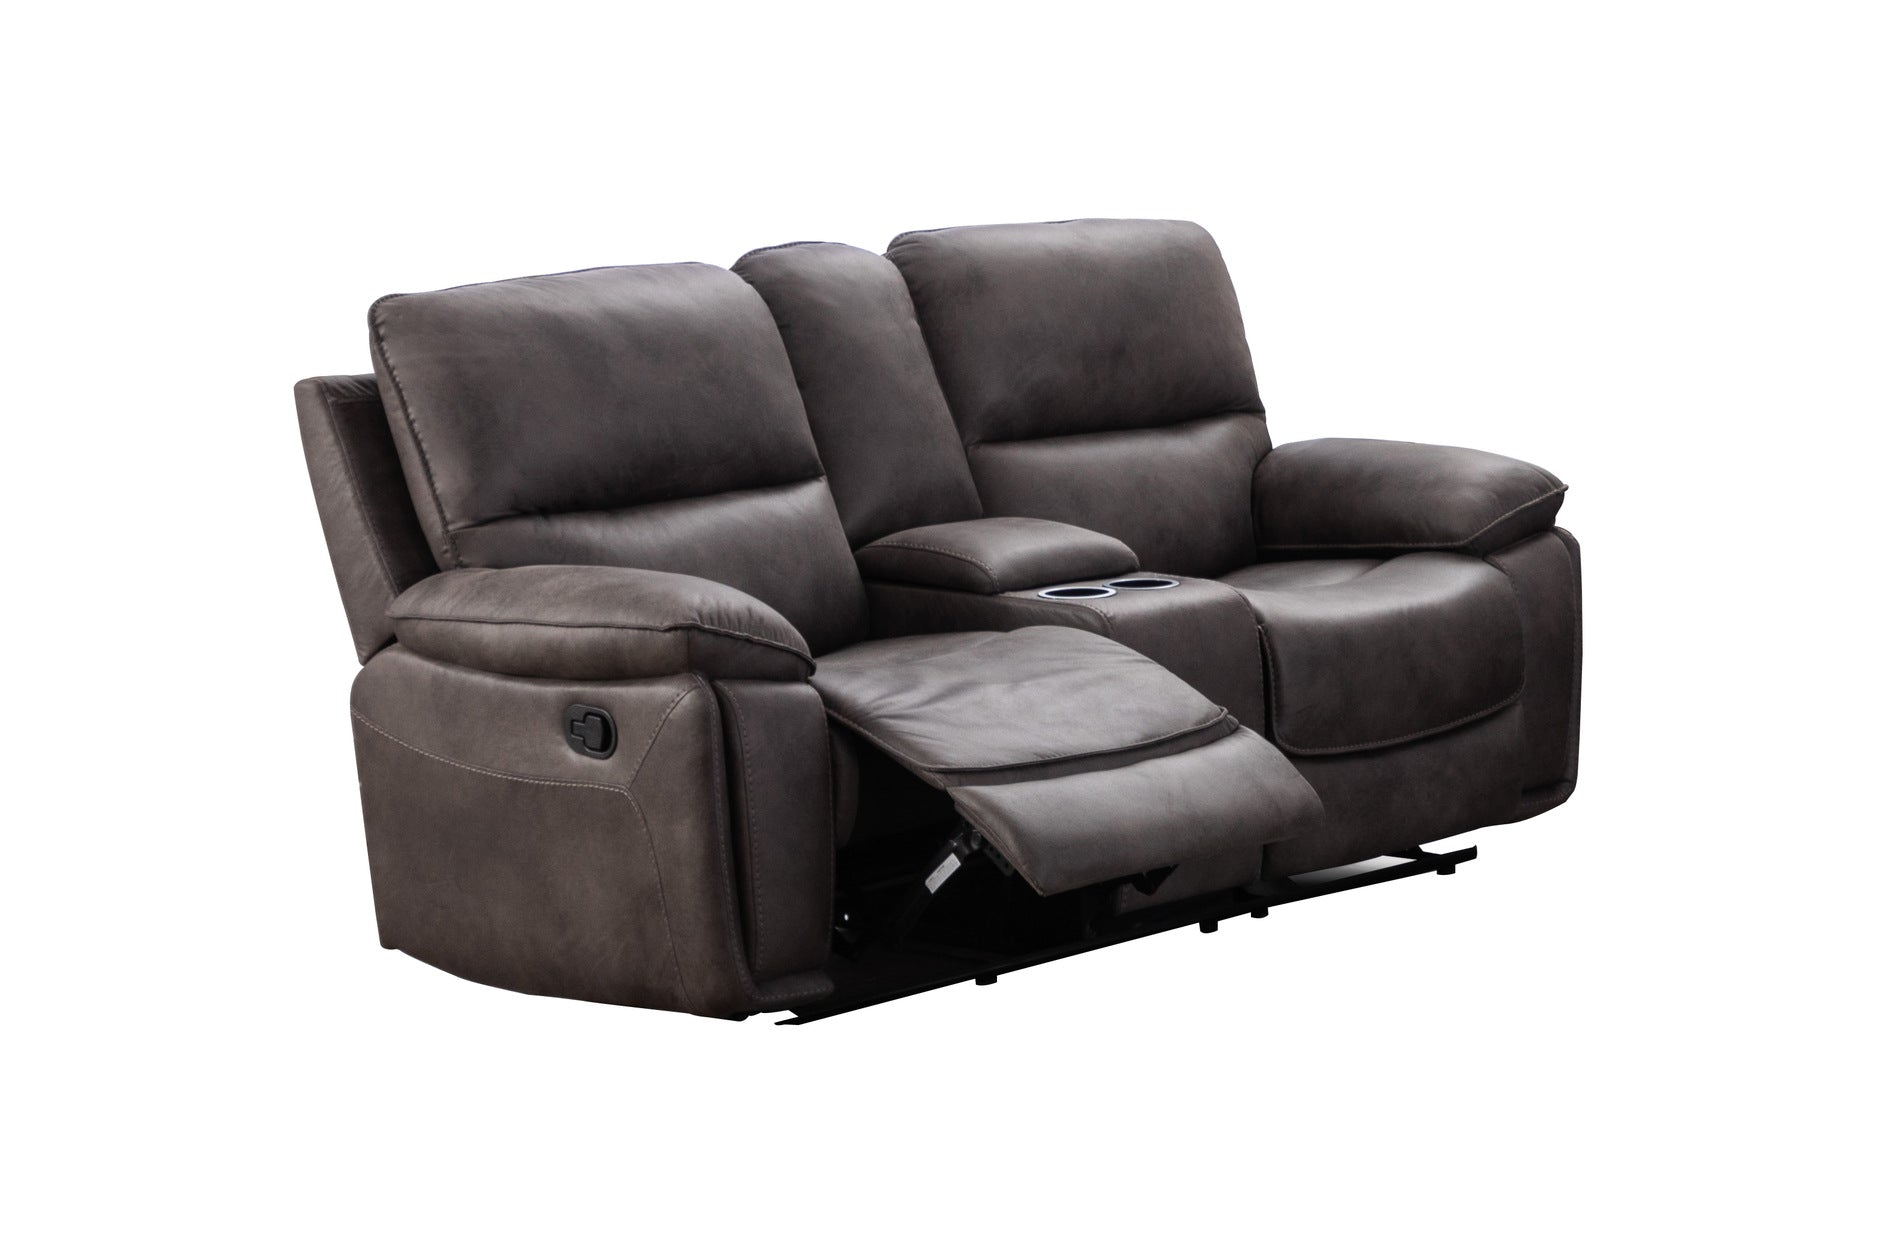 Grey Easton Recliner Seating Collection 99929GRY